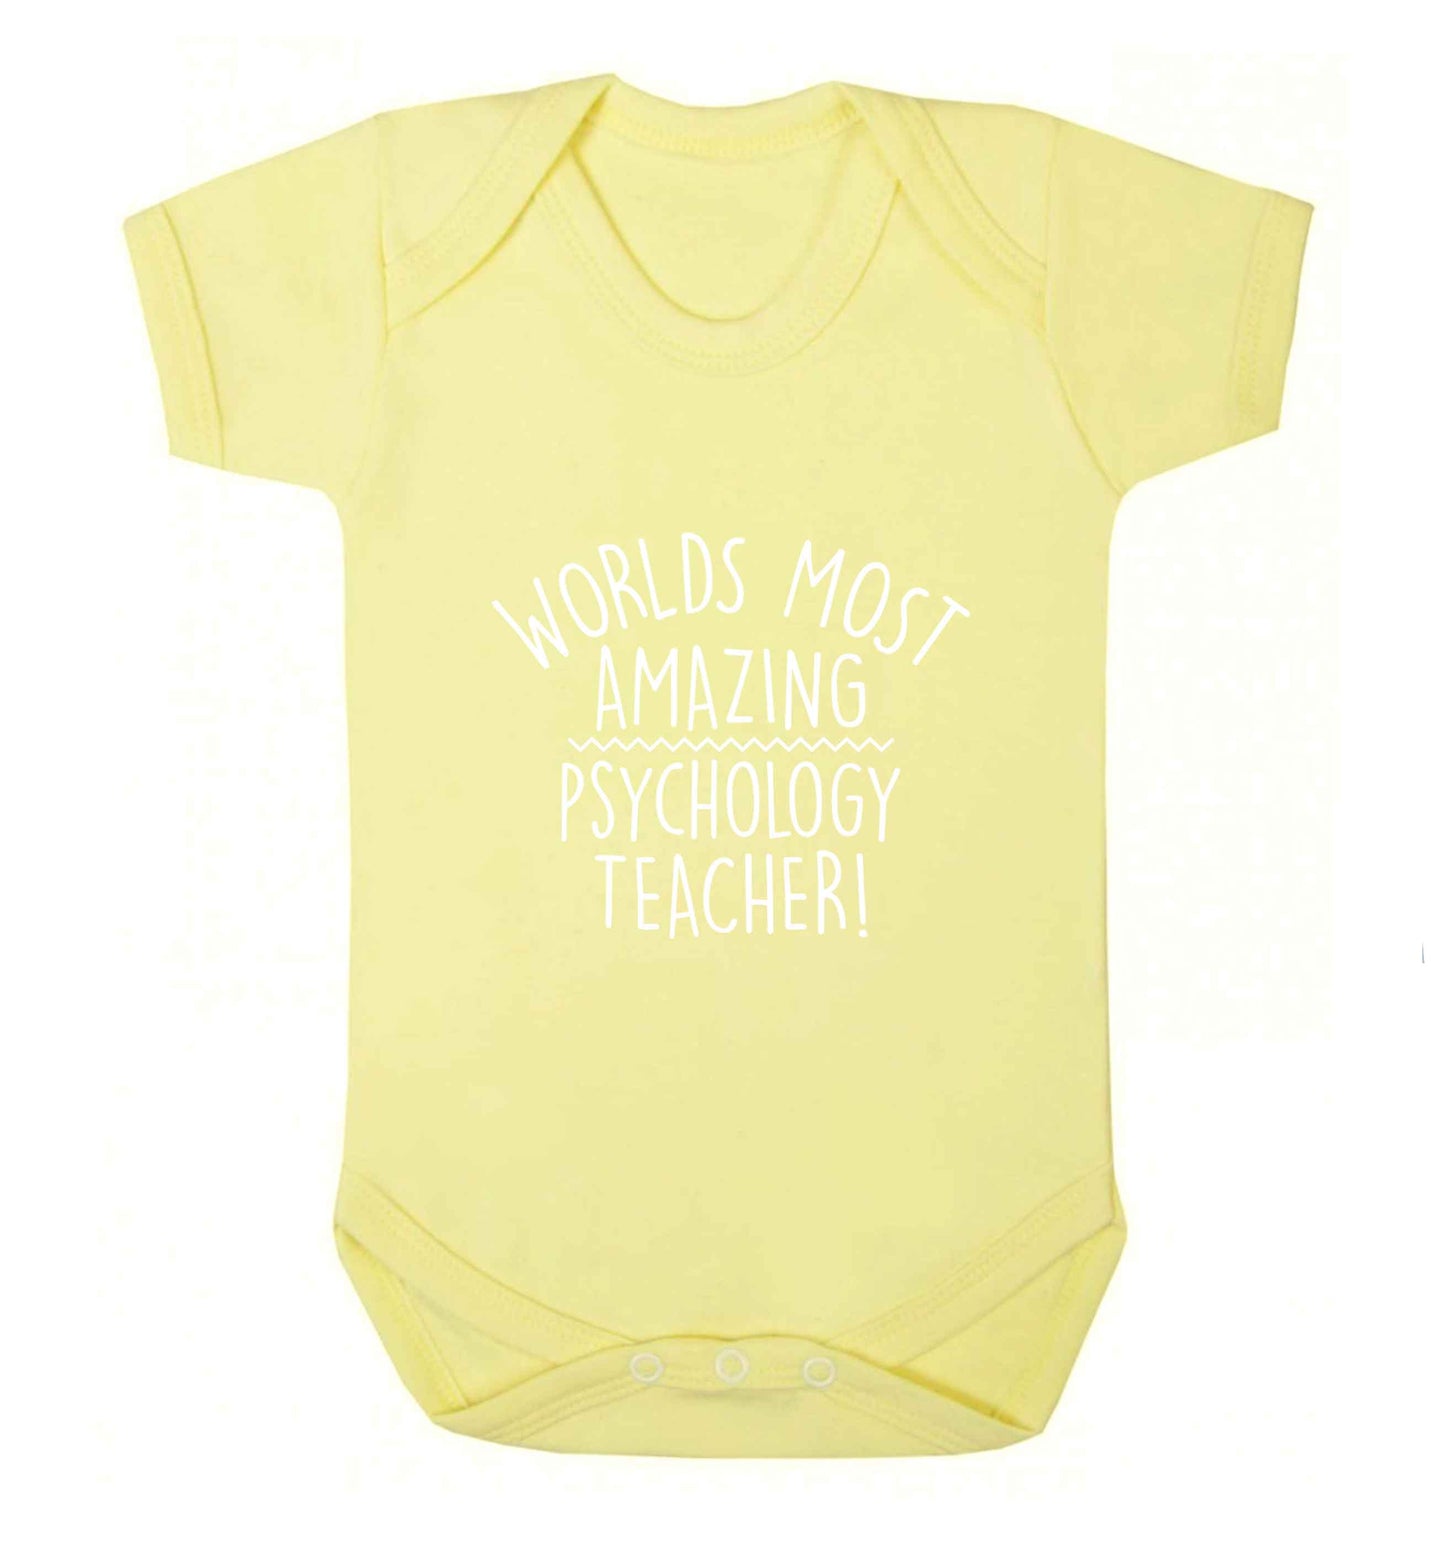 Worlds most amazing psychology teacher baby vest pale yellow 18-24 months